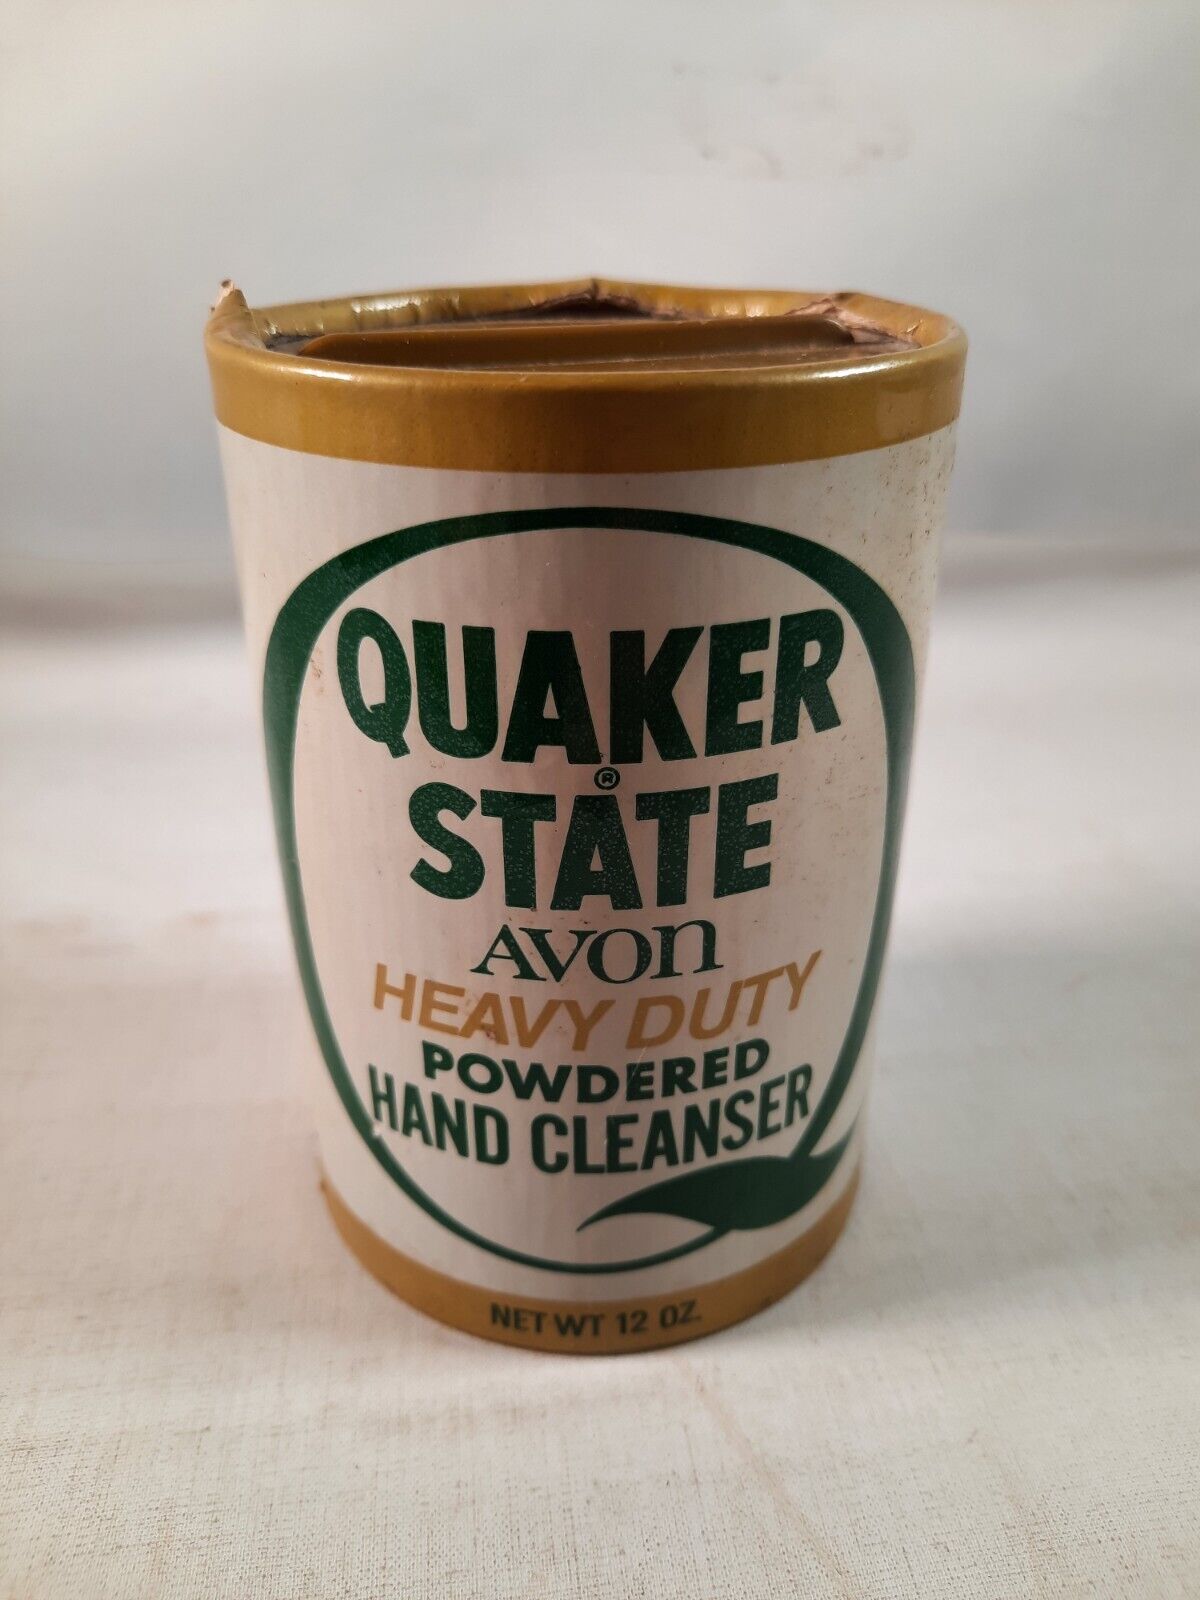 Vtg Quaker State Heavy Duty Powdered Hand Cleaner by Avon full has discoloring 